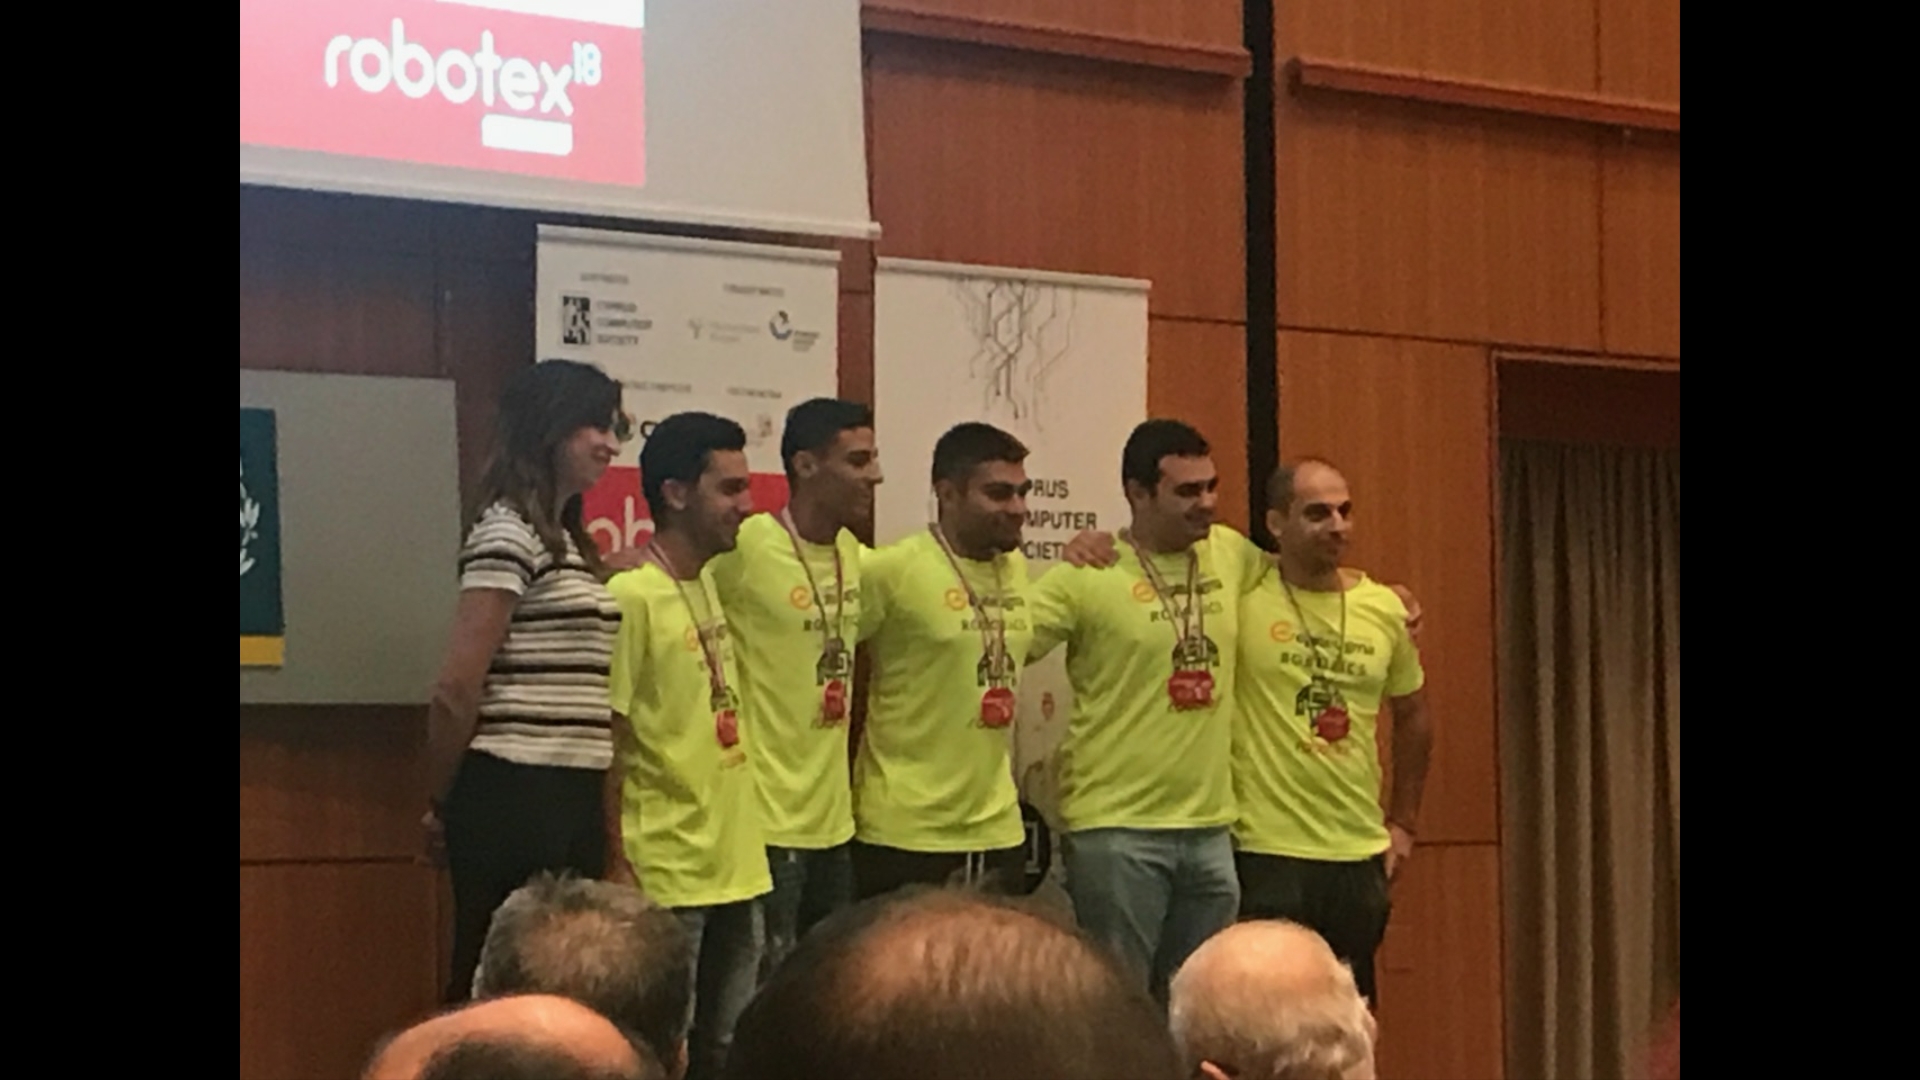 Congratulation to Gregoris Orphanides (5B) and his team, for the outstanding achievement in Robotics